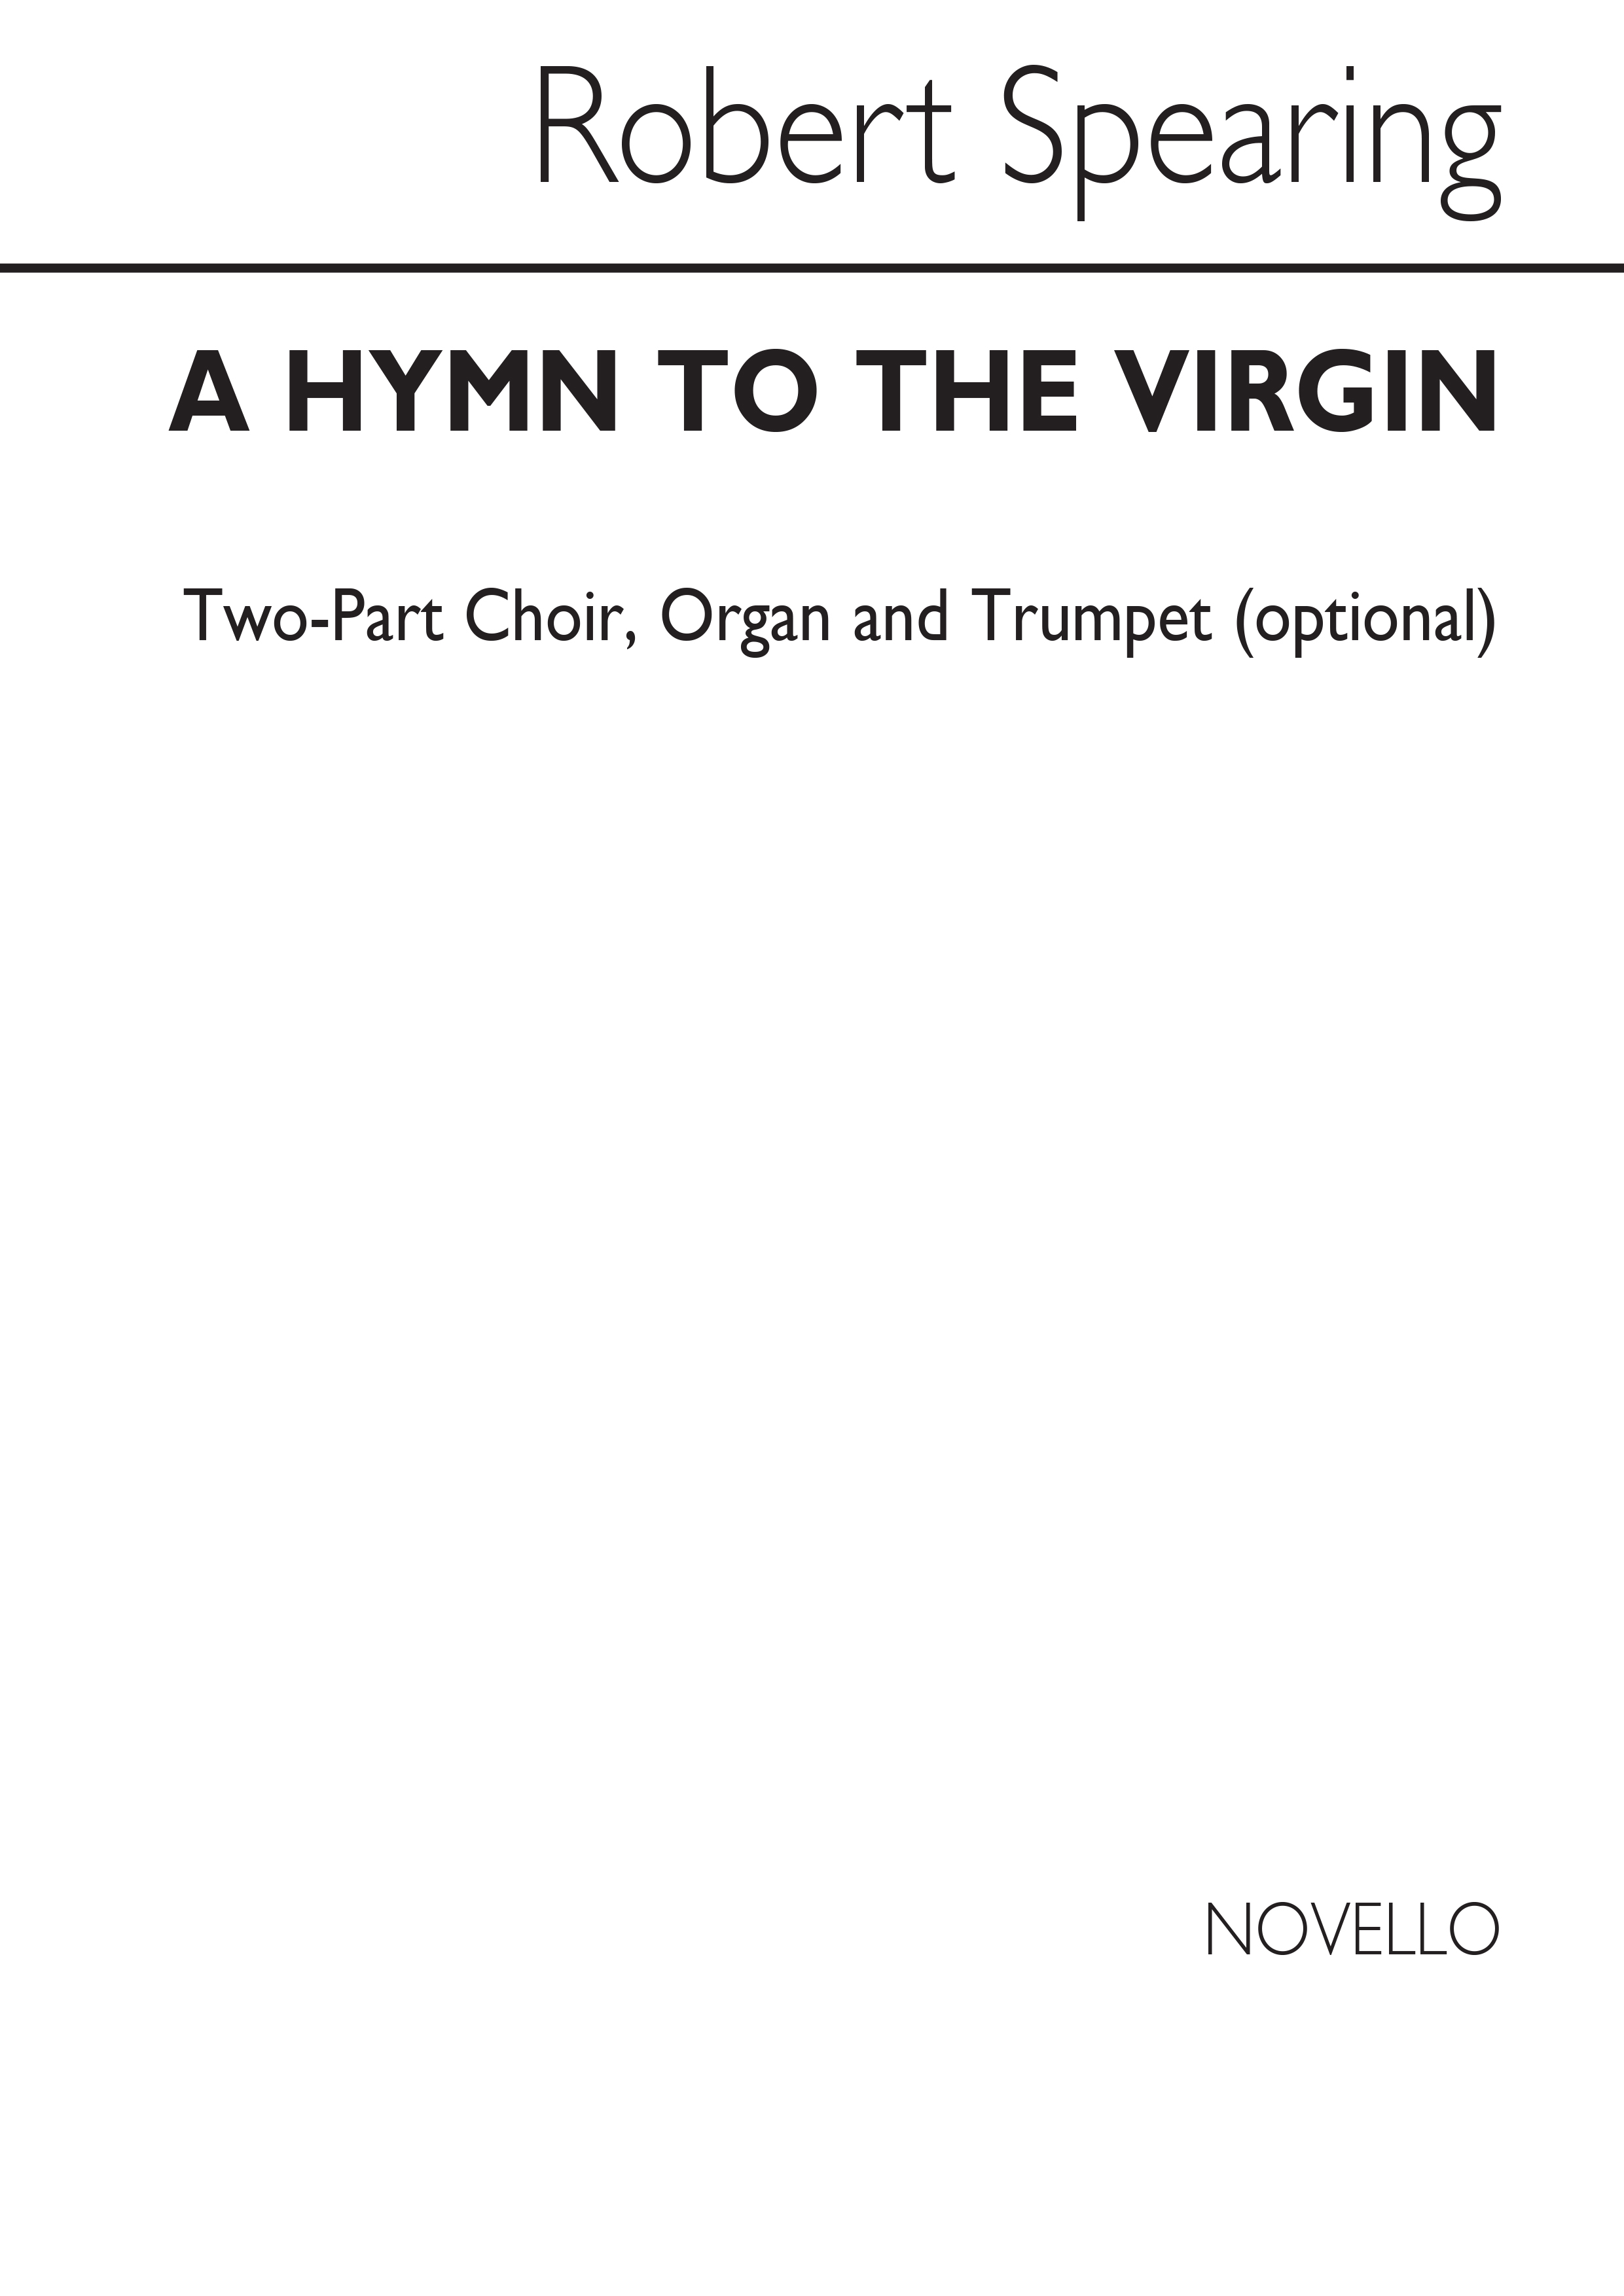 Spearing: Hymn To The Virgin